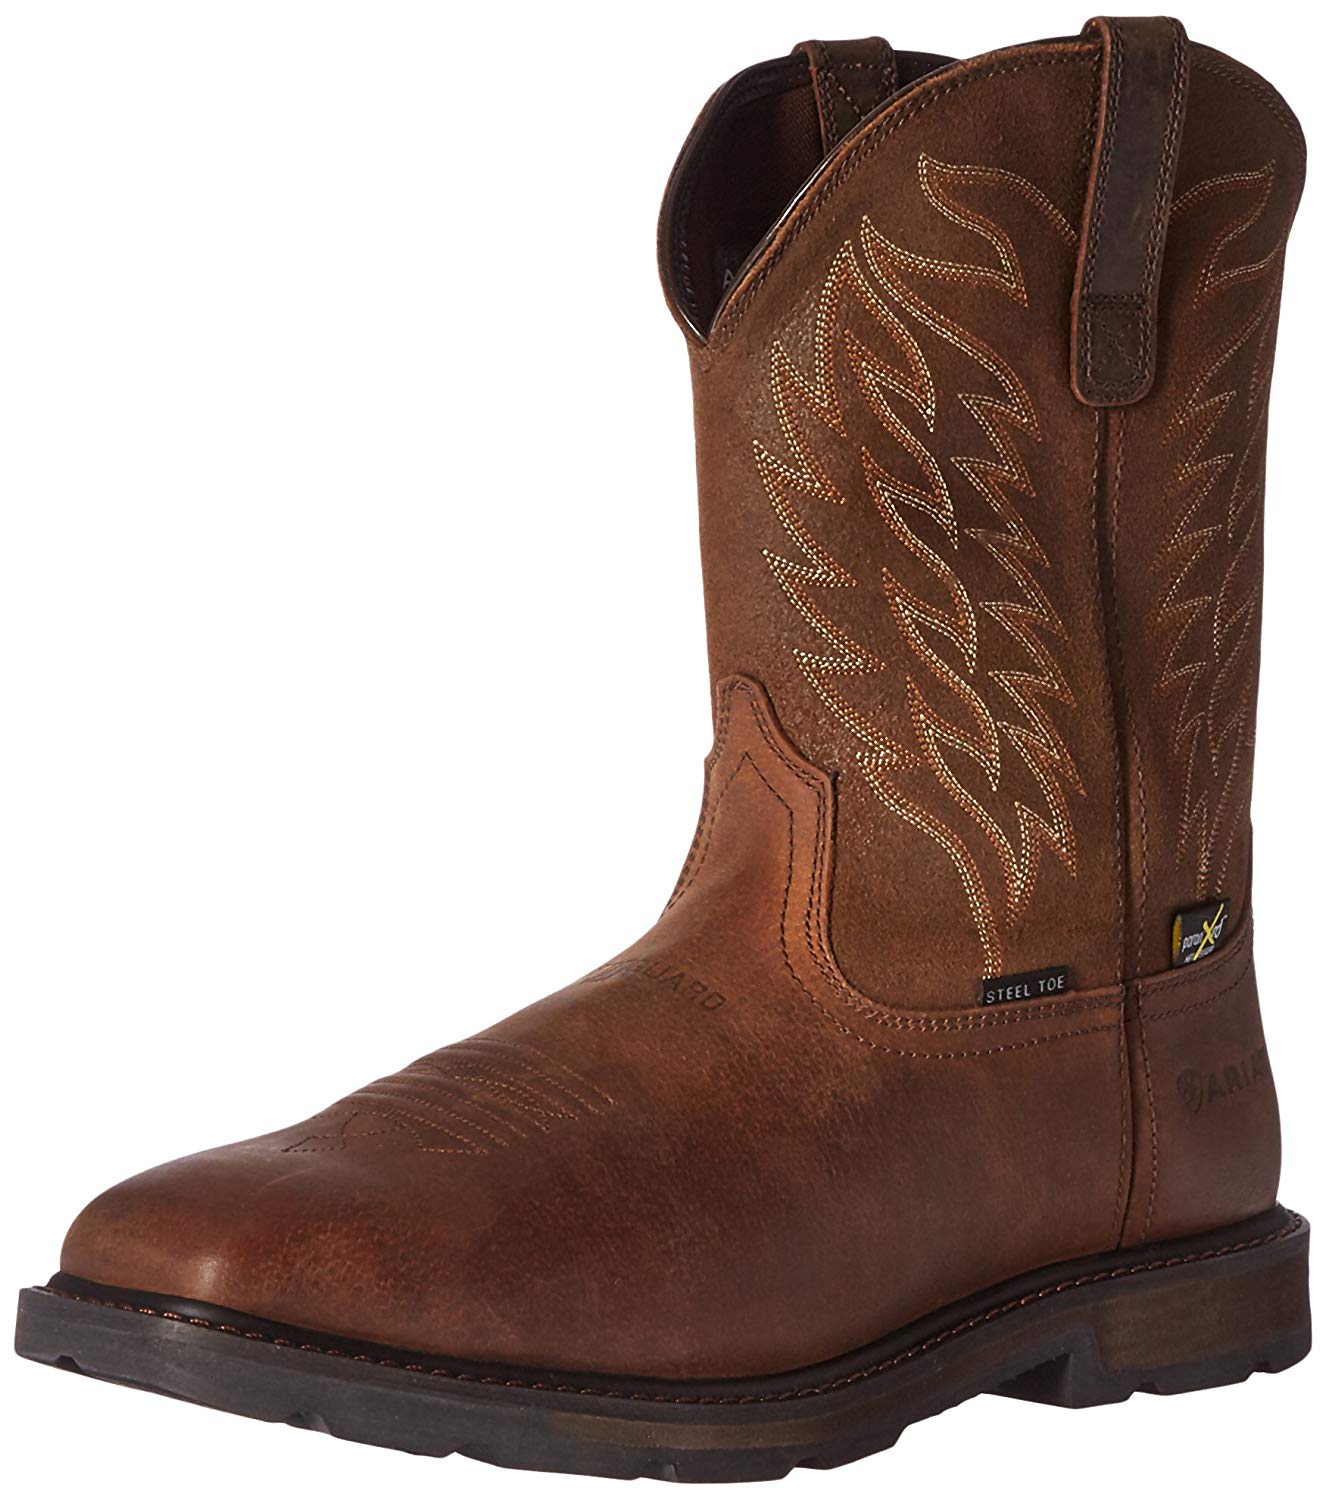 Ariat Mens Groundbreaker Closed Toe Mid-Calf Western Boots, Brown, Size ...